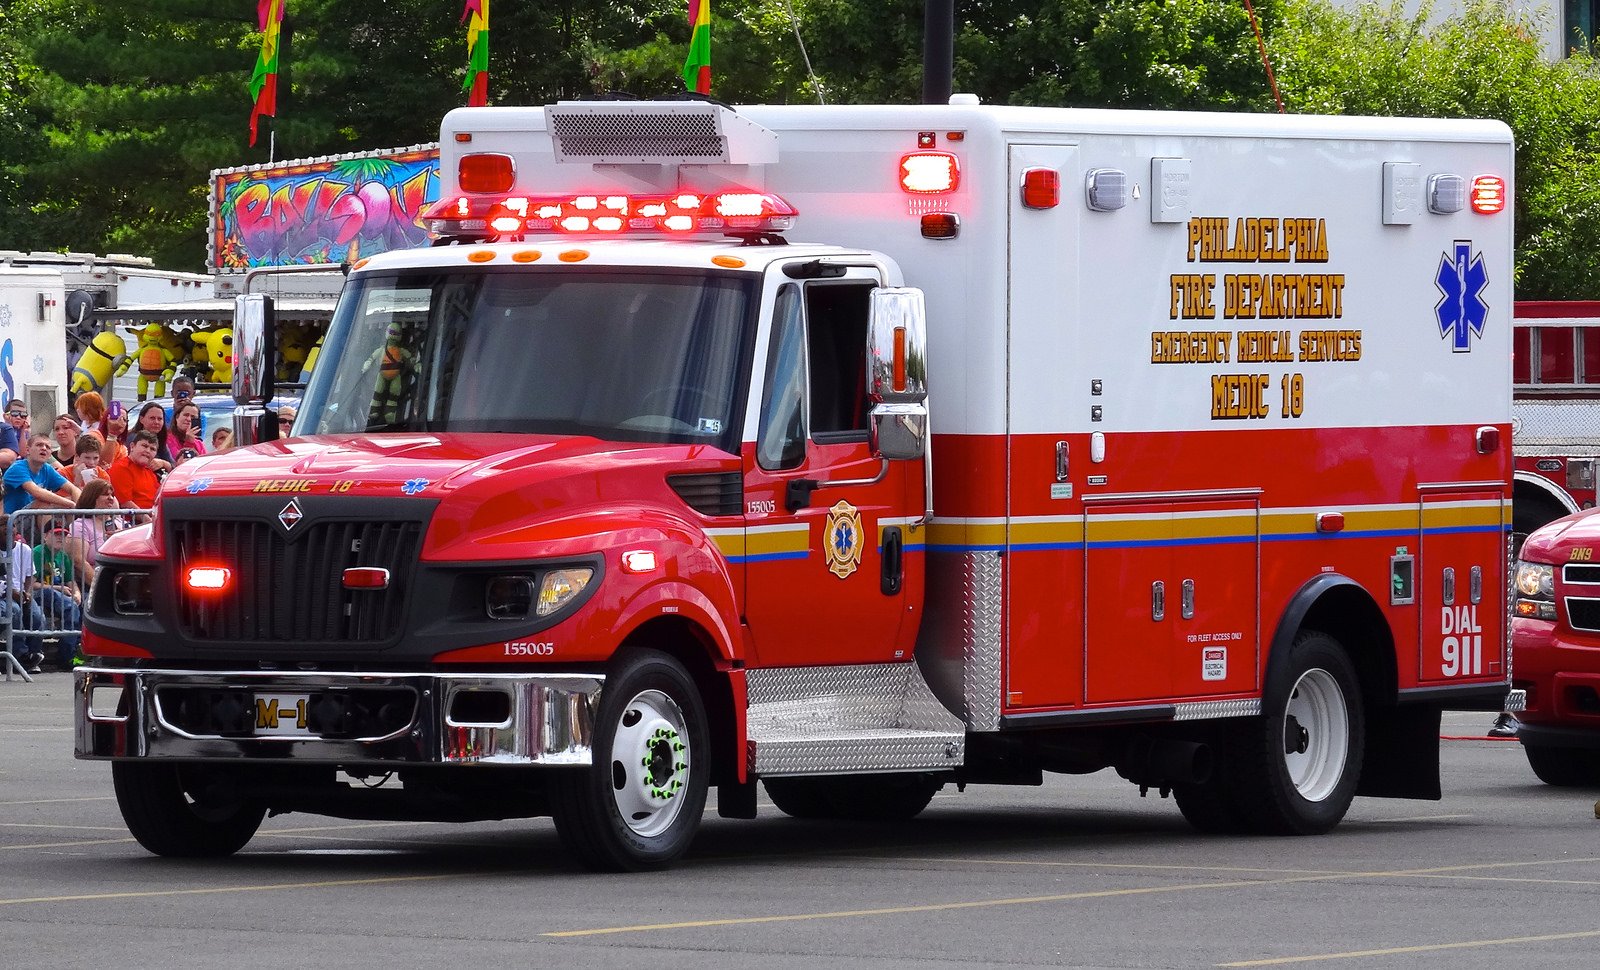  rescue fire truck suv Emergency medic cars pompier camion wallpaper